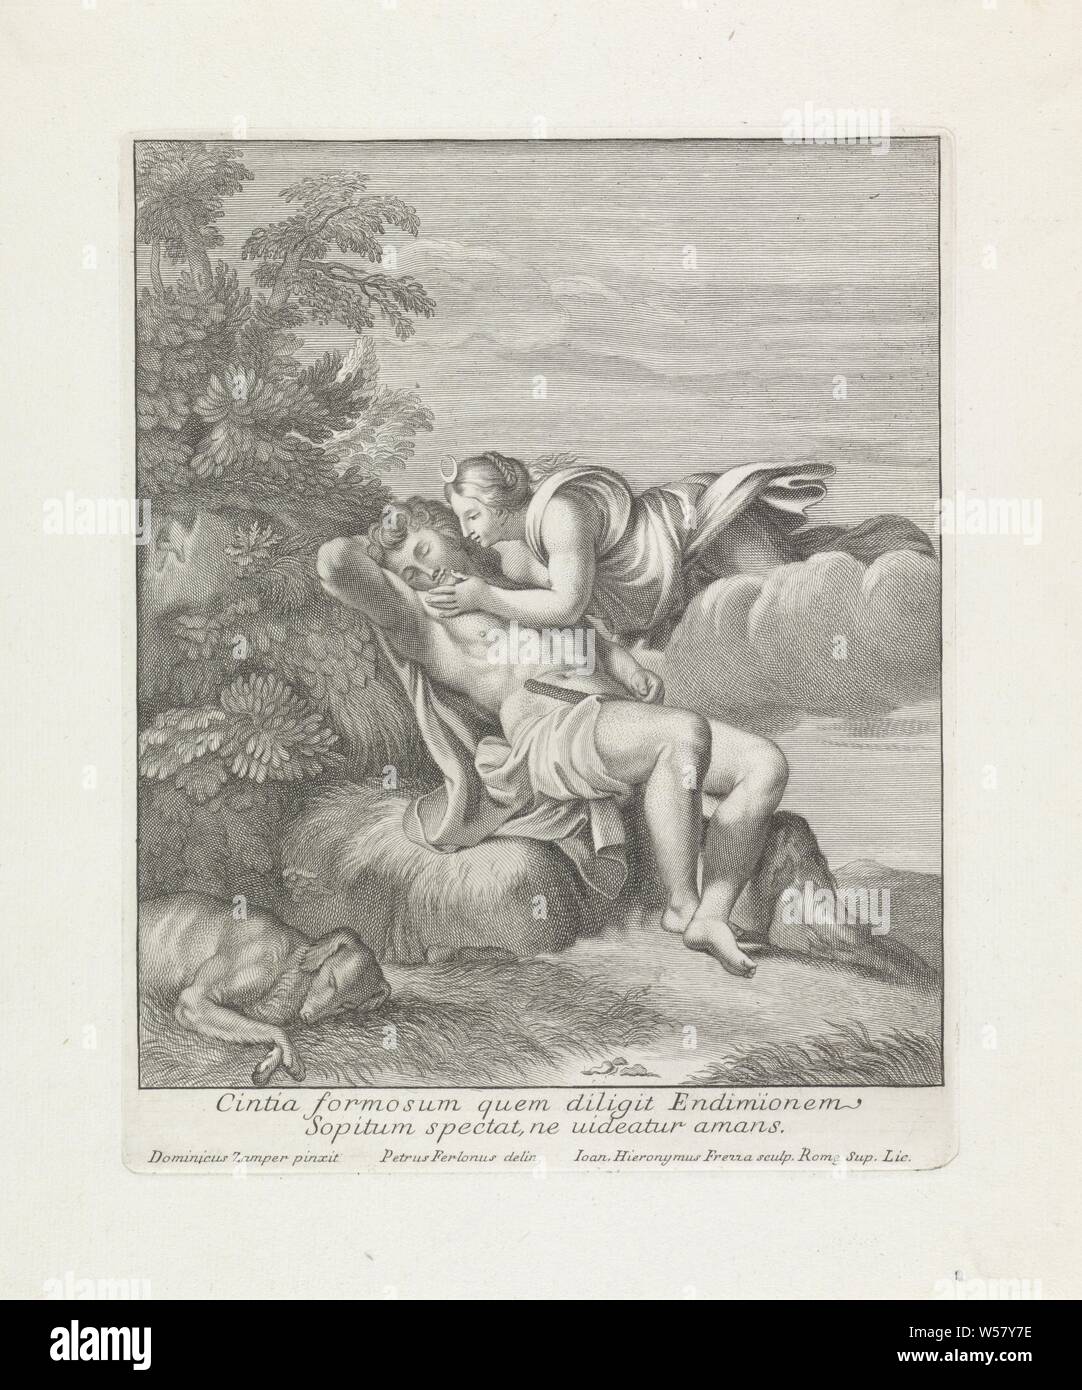 Diana visits sleeping Endymion Cintia formosum quem diligit Endimionem / Sopitum spectat, ne videatur amans (title on object) The life of Diana (series title), The goddess Diana floats on a cloud next to the sleeping Endymion. She is trying to kiss him. In the foreground on the left is a sleeping dog., Sleeping, unconsciousness, Diana (Luna) visiting the sleeping Endymion, Giovanni Girolamo Frezza (mentioned on object), 1713, paper, engraving, h 265 mm × w 211 mm Stock Photo